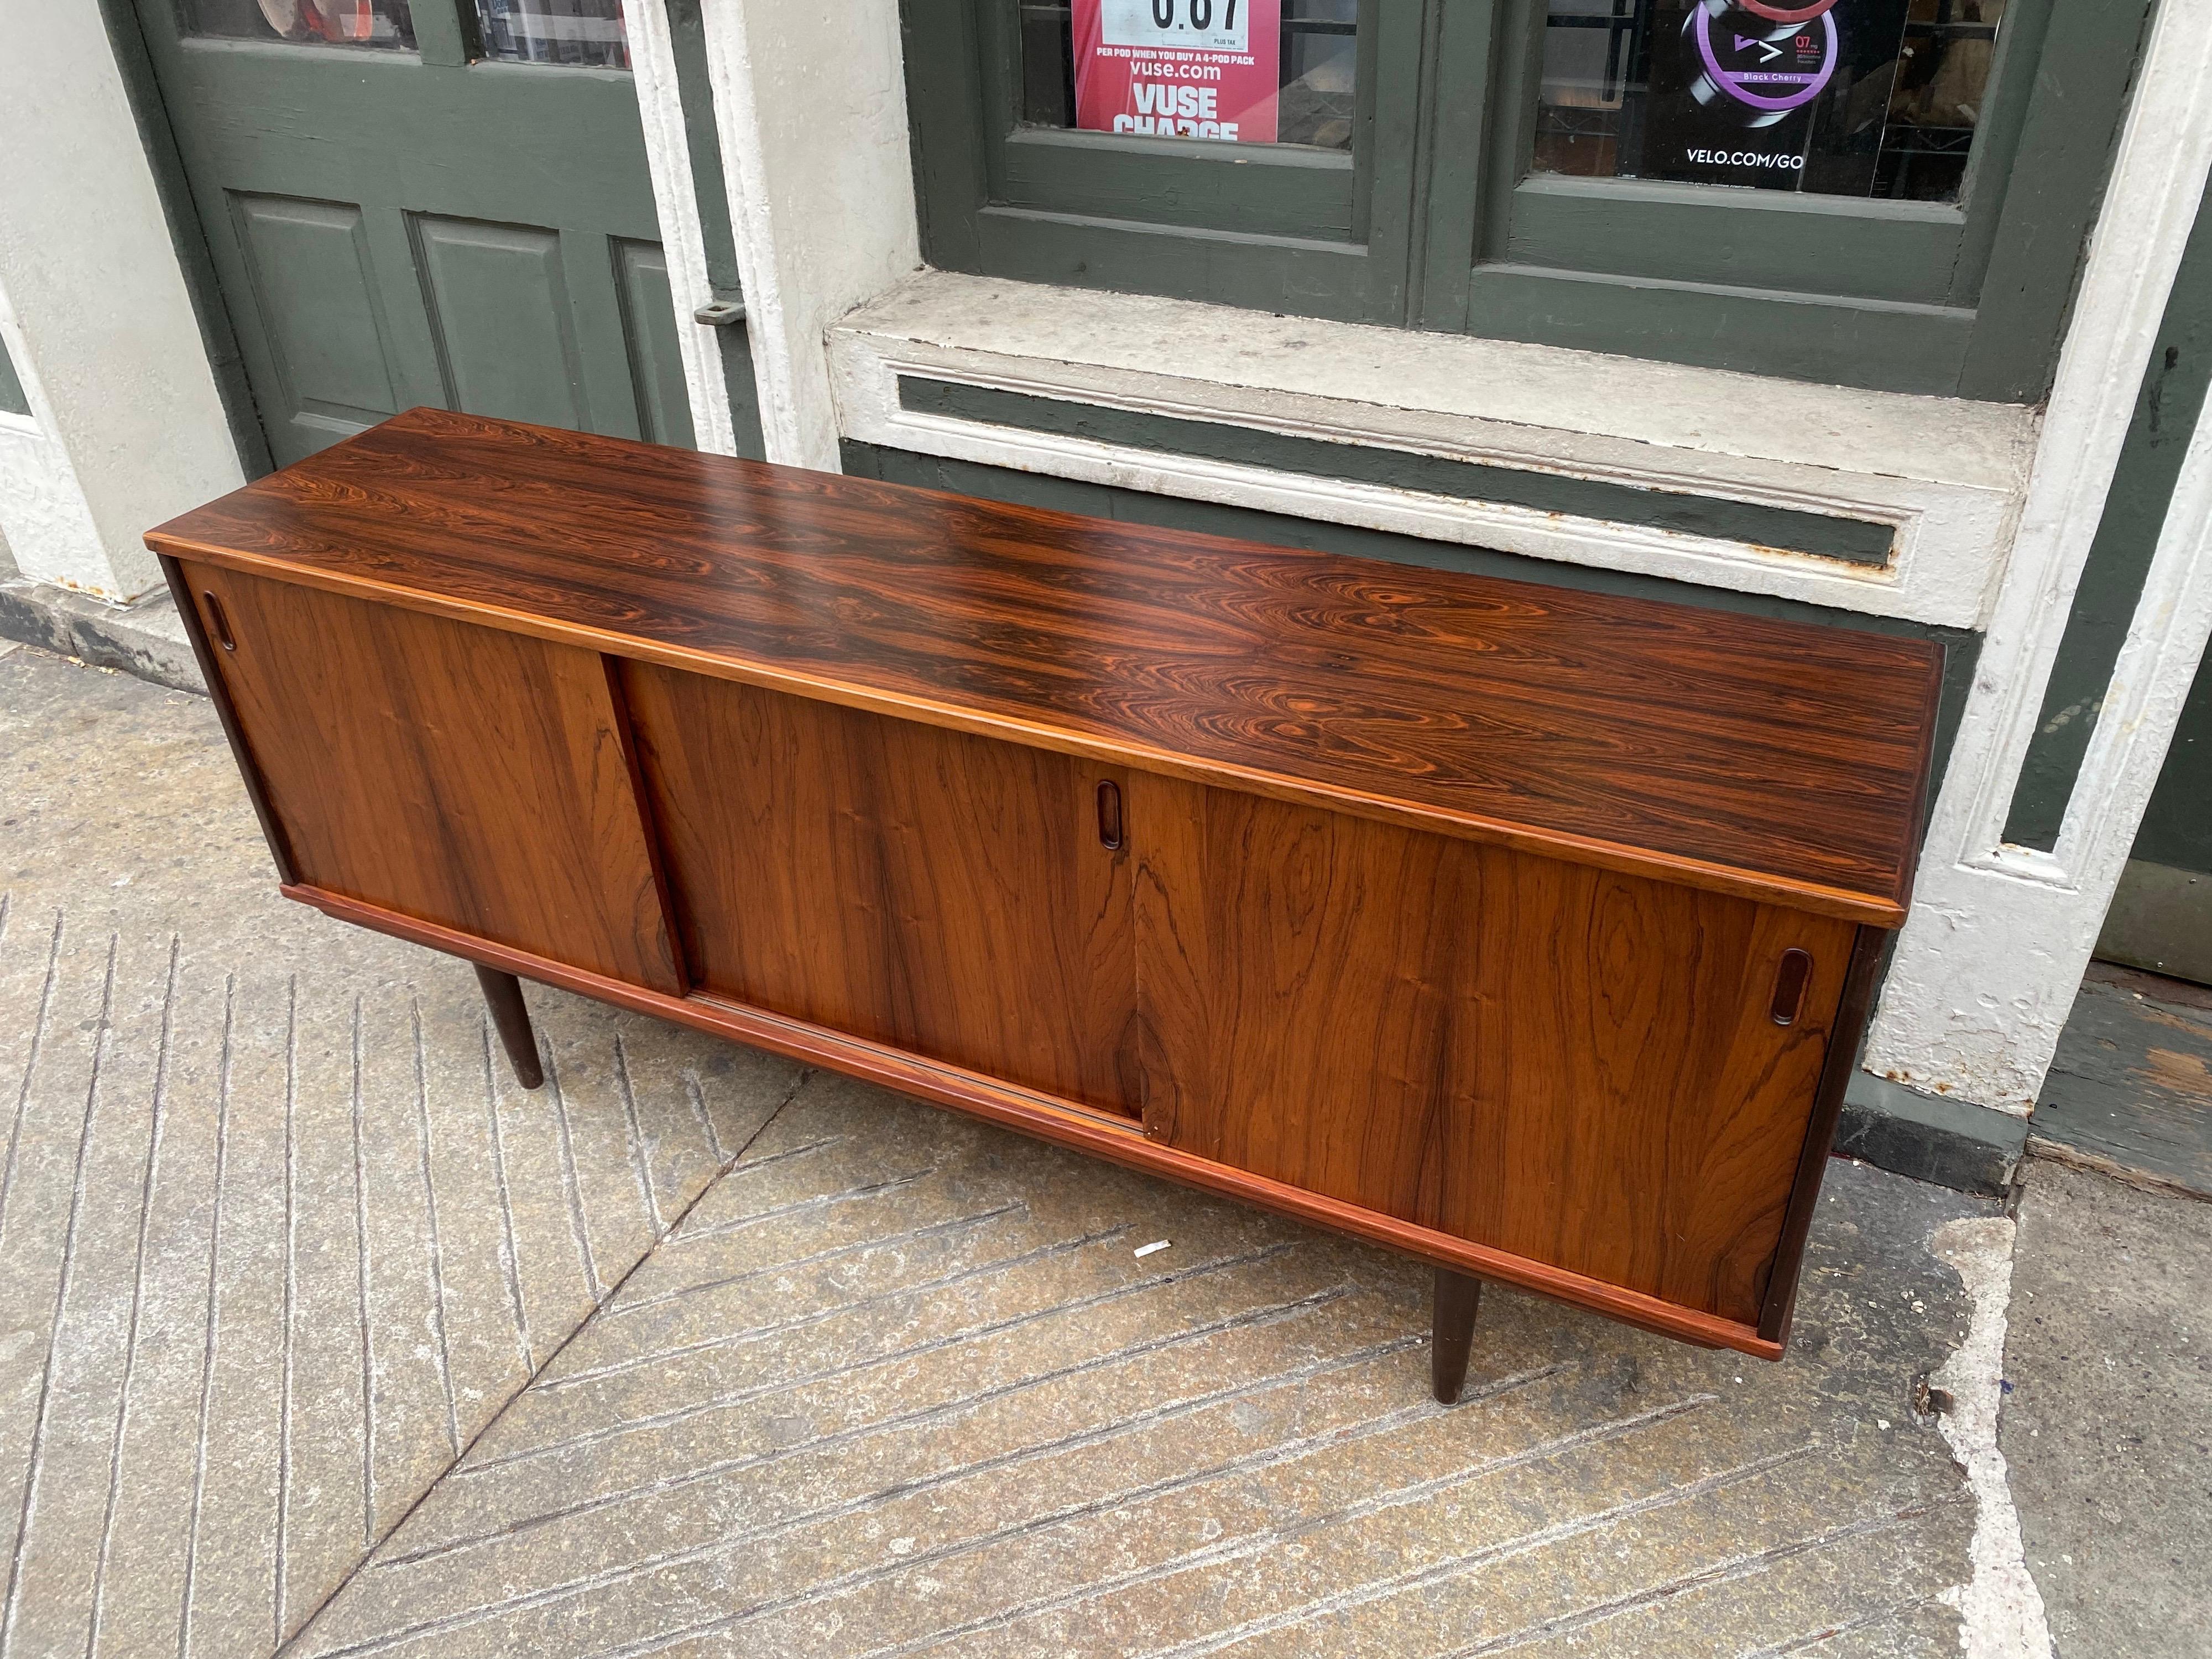 Rosewood 3 door Credenza. Doors slide easily to reveal 1 adjustable shelf in each opening. Veneer is very nice, all original with very expressive grain and color. Right side would of had two shallow pull out drawers that are missing.